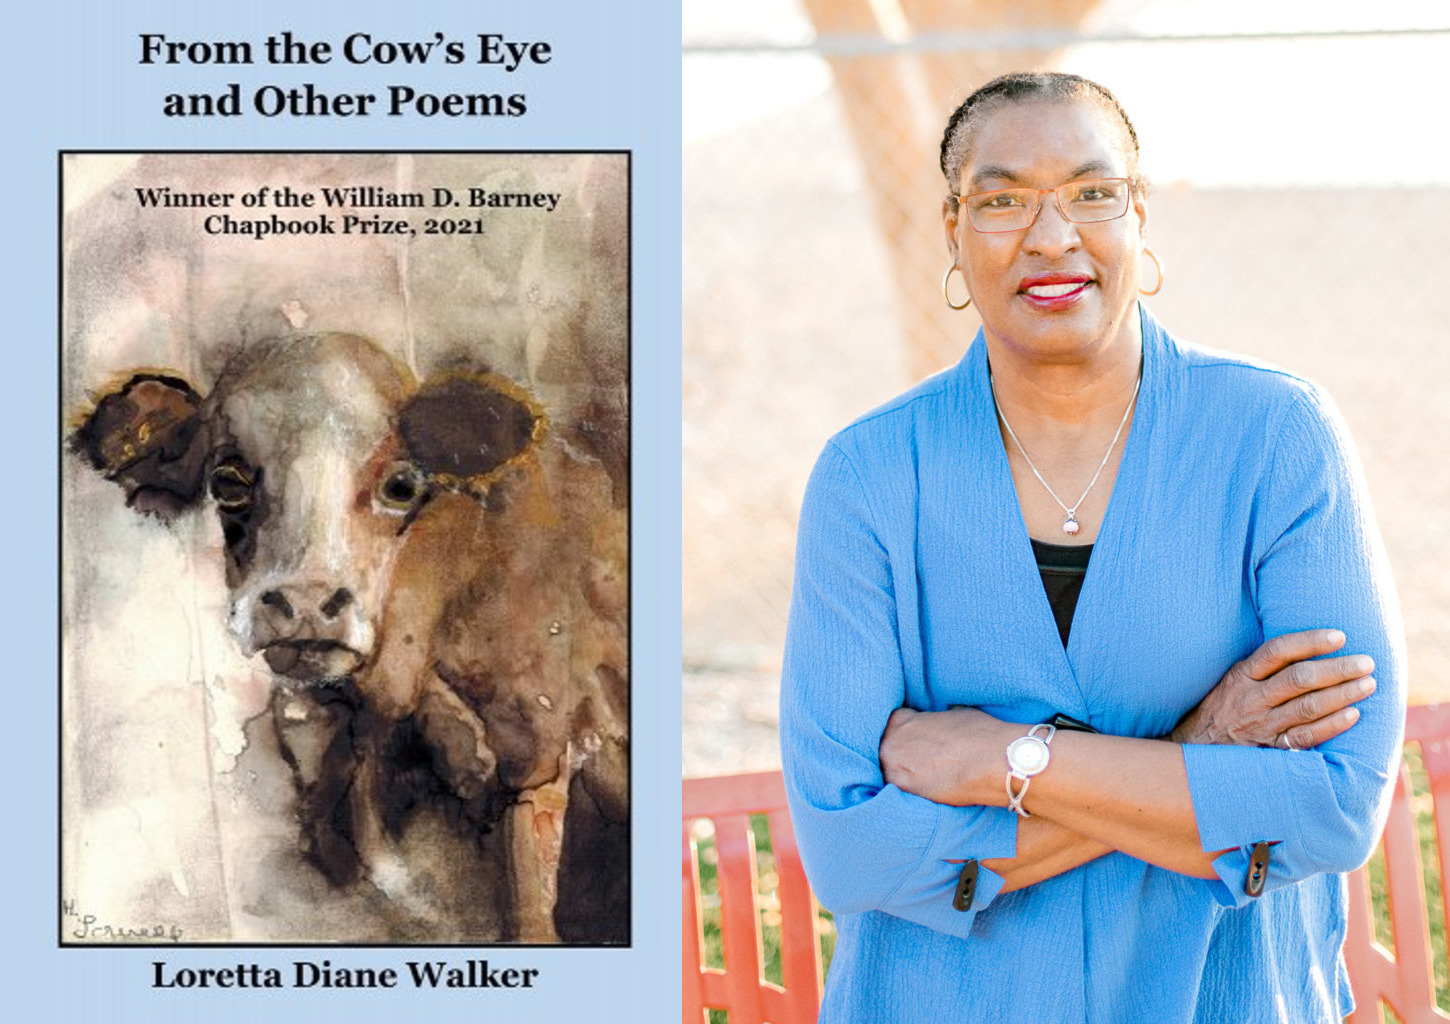 Poetry Review: From The Cow’s Eye and Other Poems by Loretta Diane Walker